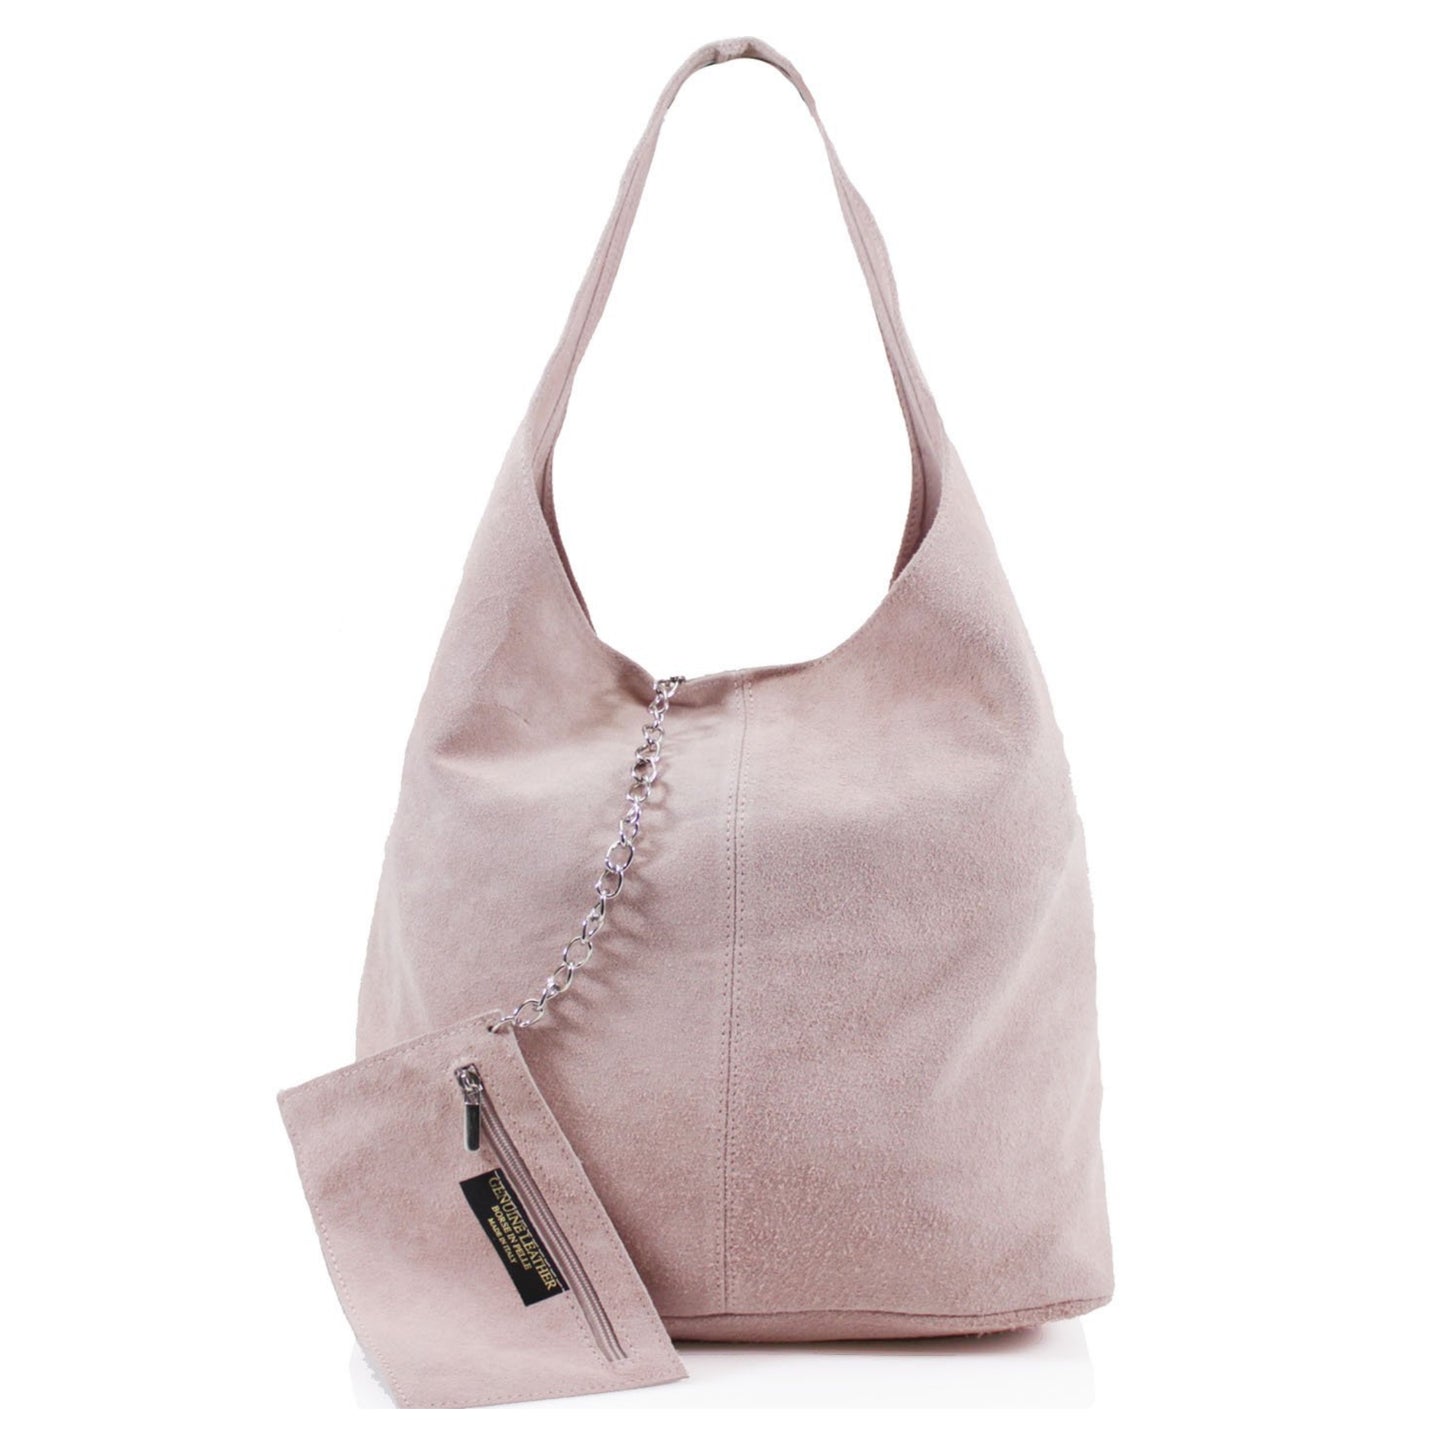 Genuine Suede Dusty Pink Leather Large Hobo Shopper